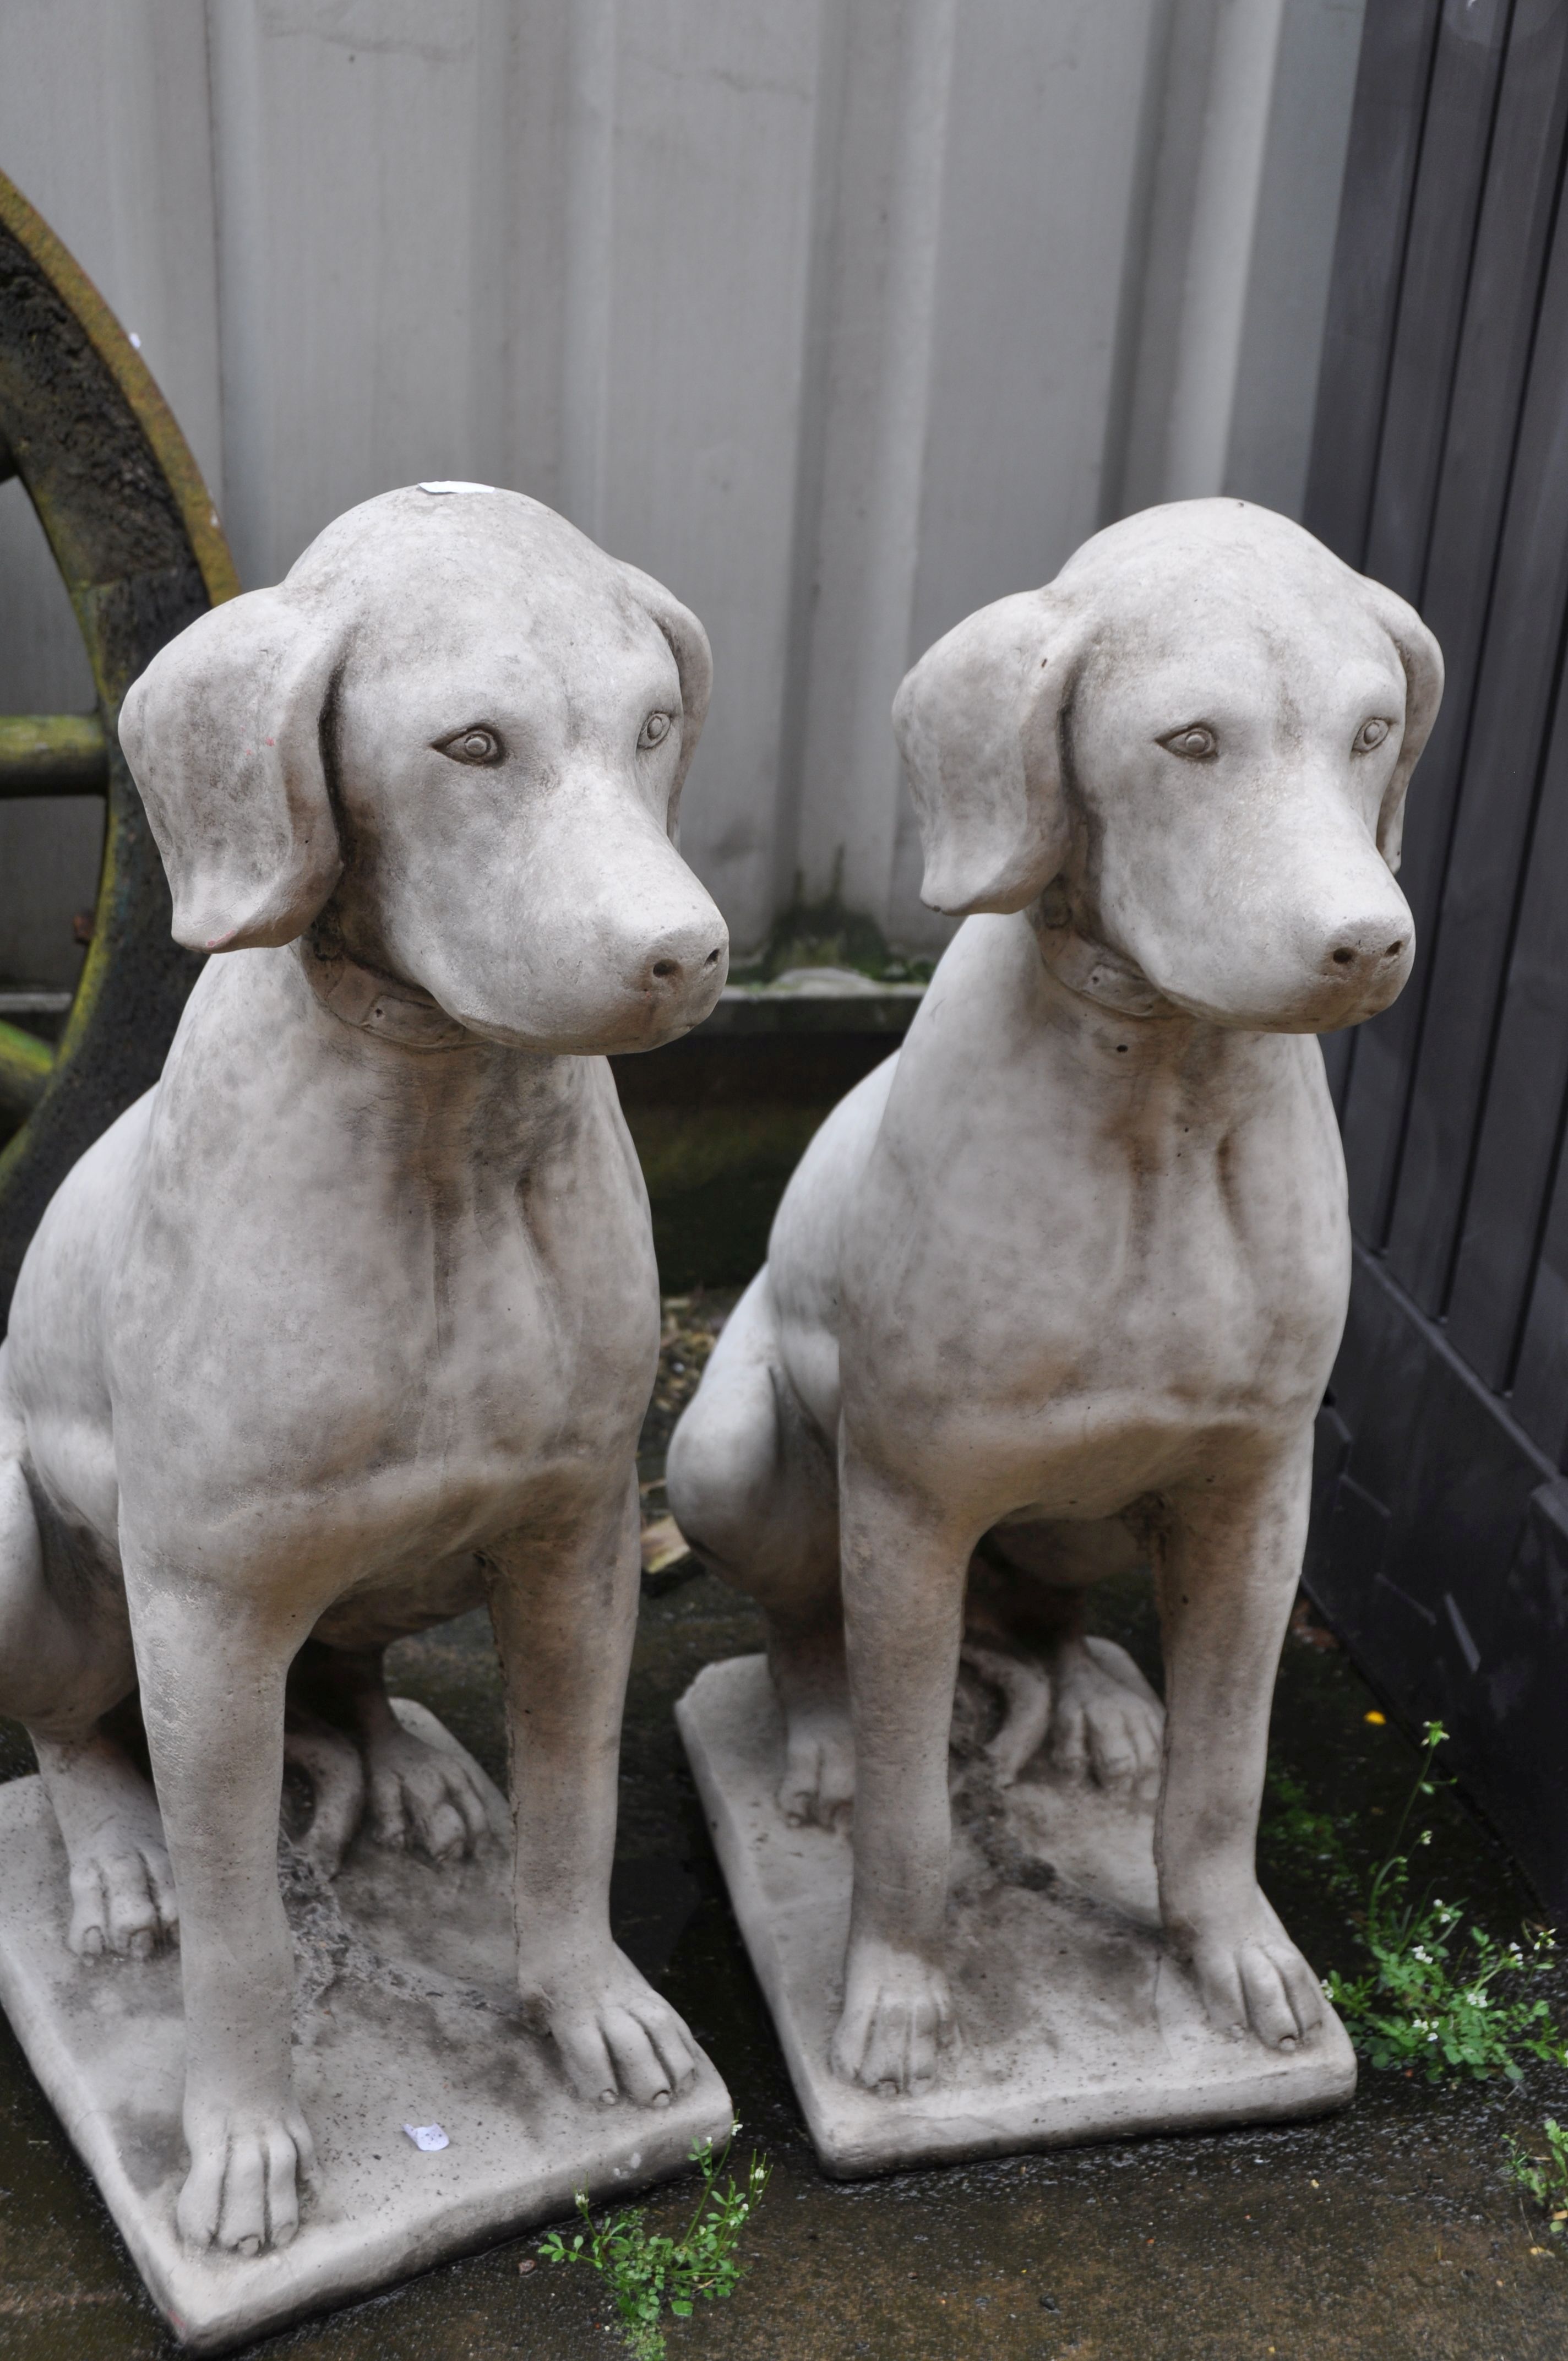 A PAIR OF COMPOSITE GARDEN SITTING DOG STATUES